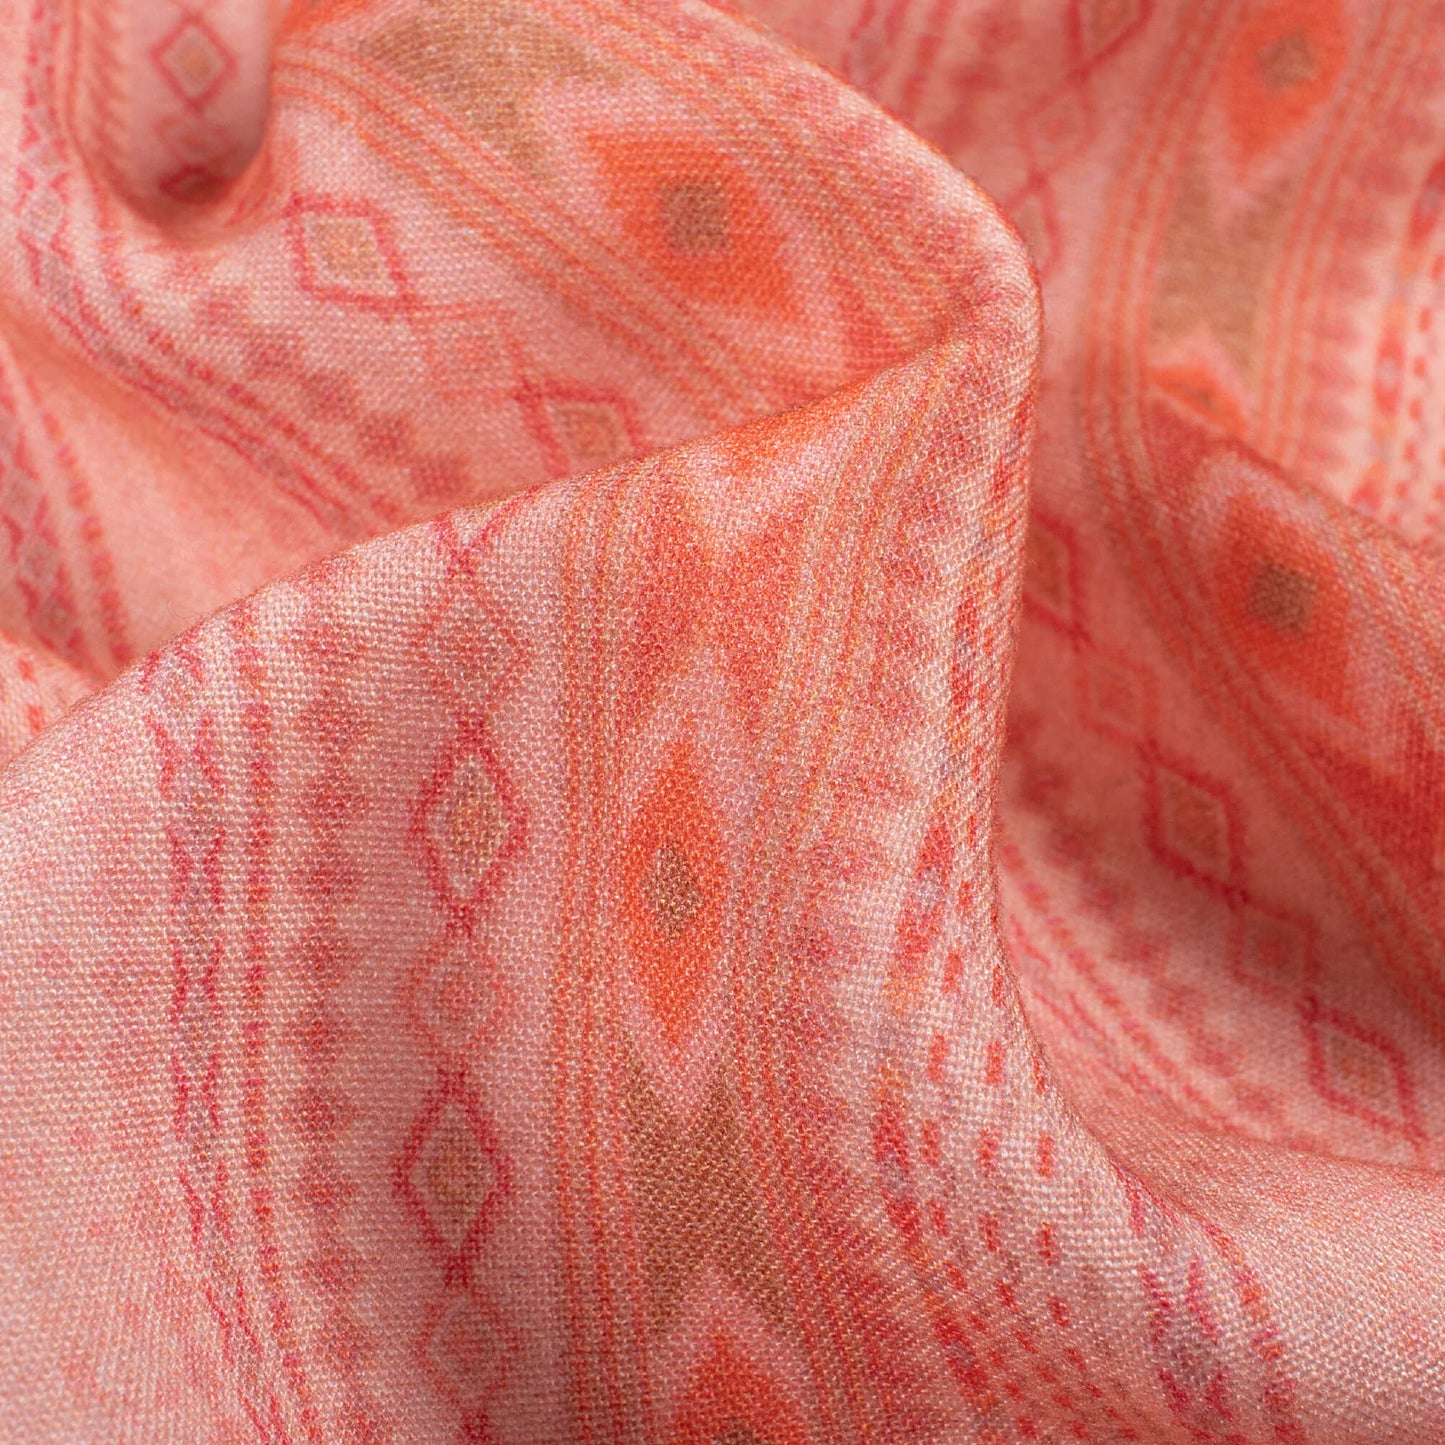 Peach And Coral Orange Stripes Pattern Digital Print Viscose Rayon Fabric (Width 58 Inches)